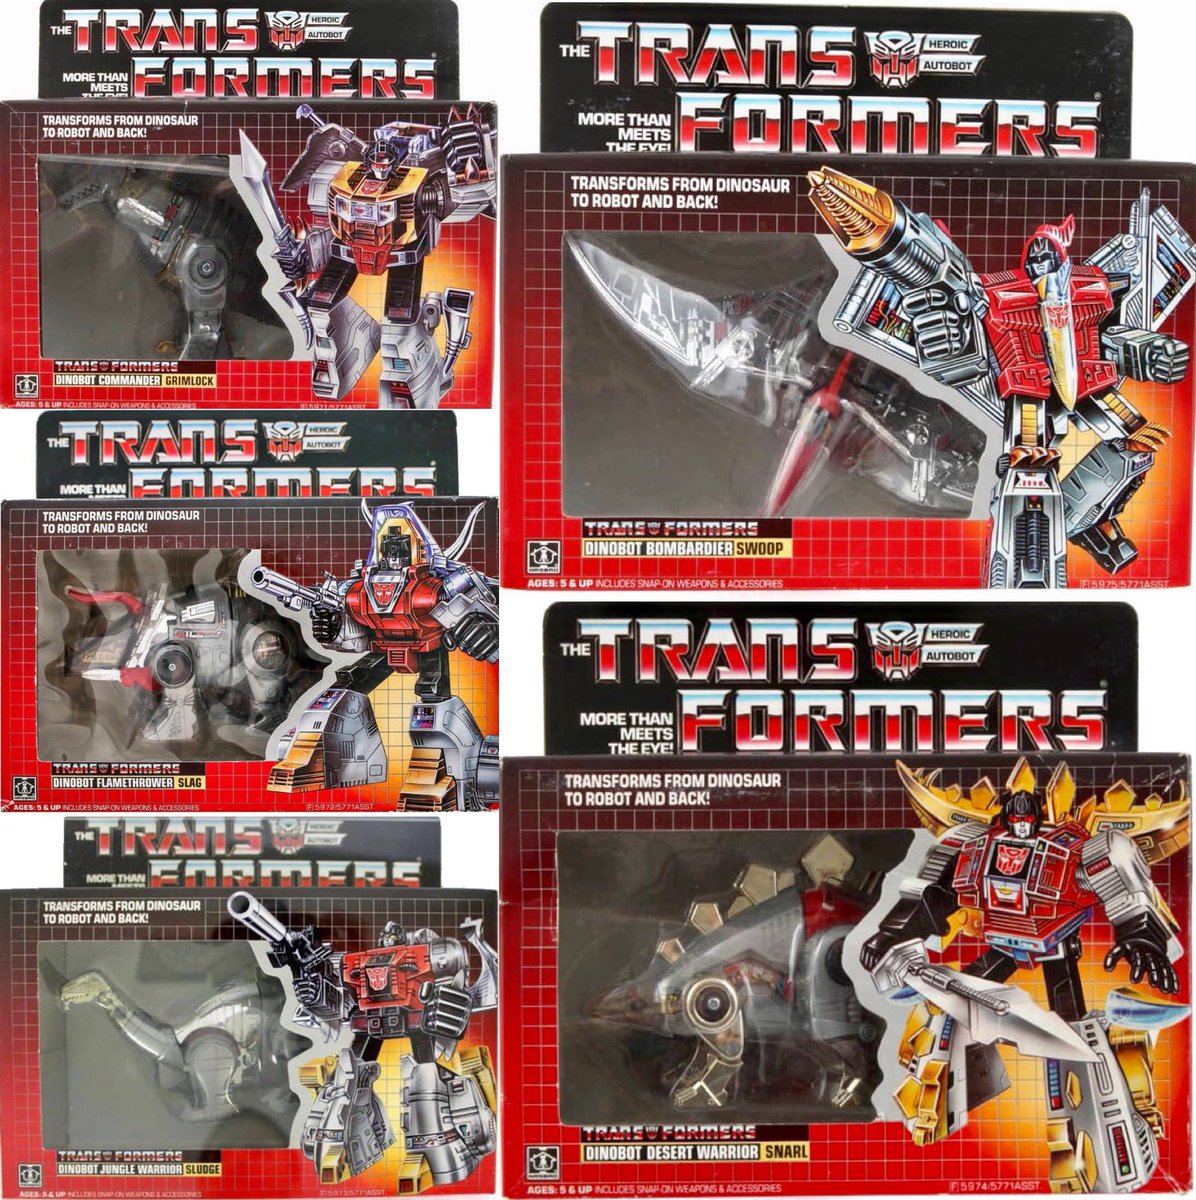 Check out Grimlock, Slag, Sludge, Swoop, and Snarl aka The Dinobots who were released as part of the 2nd wave of Transformers figures in 1985. Who was your favorite Dinobot?

#mattel #transformers #dinobots #actionfigures